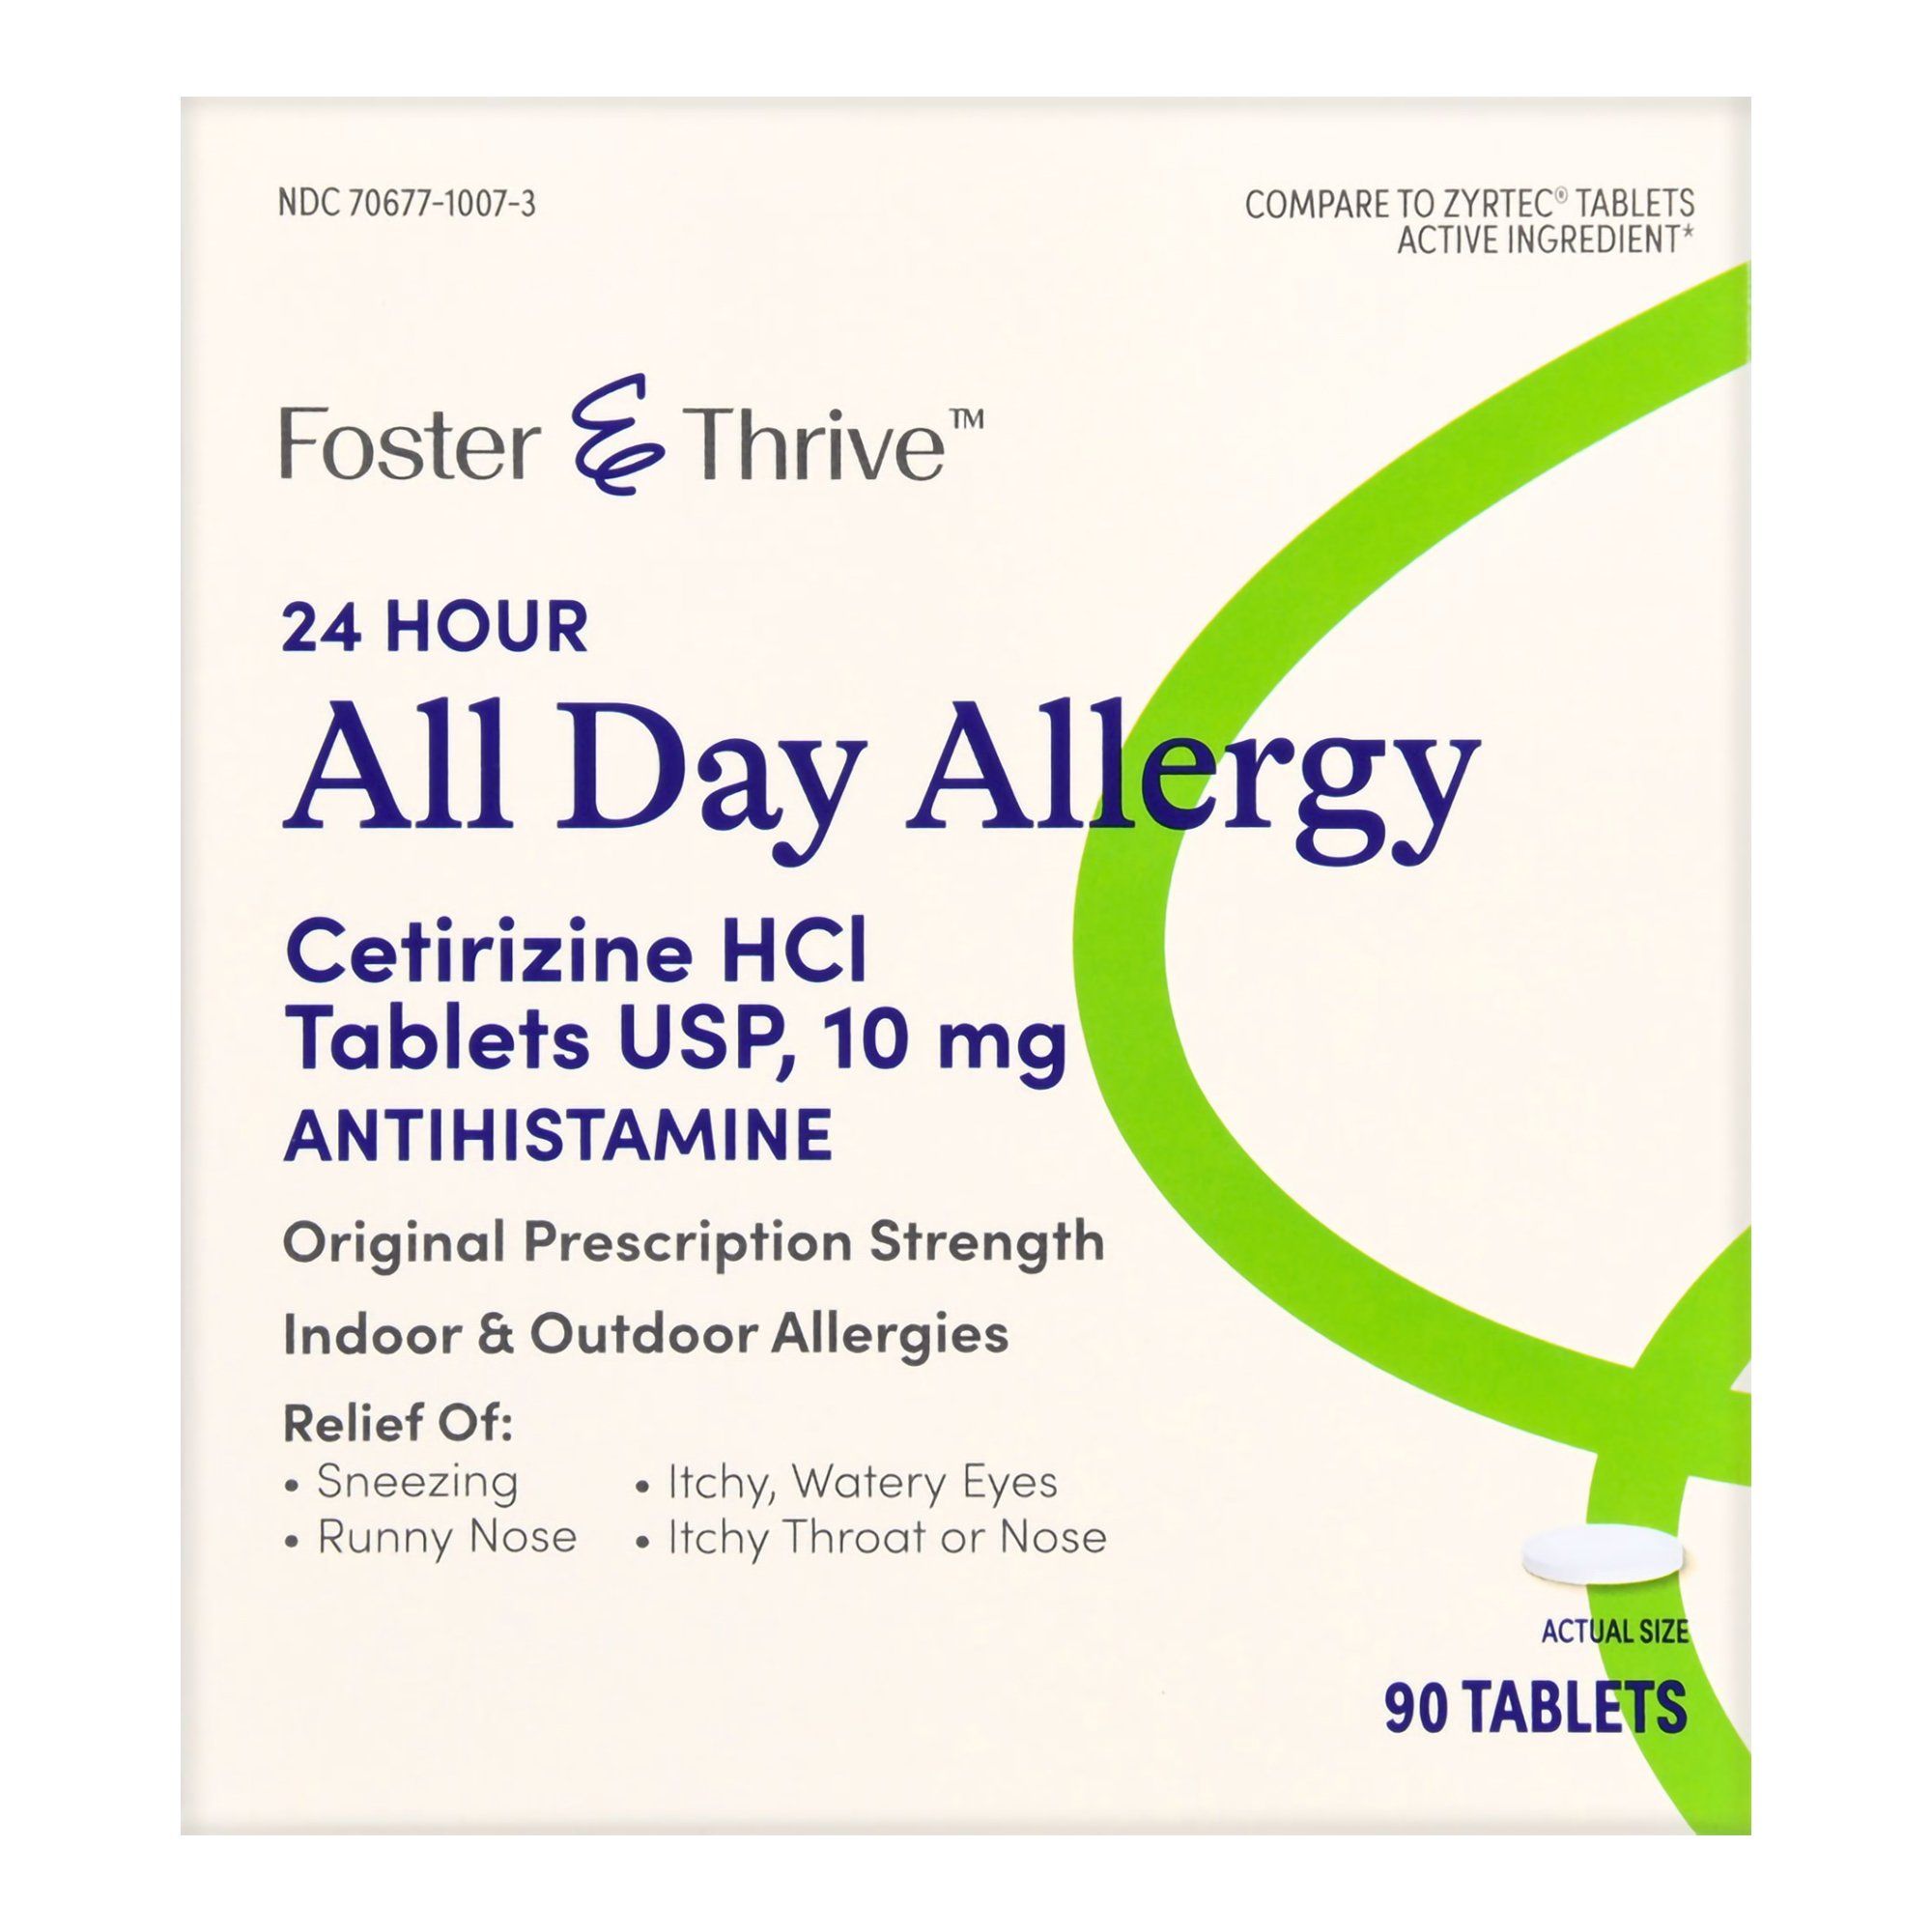 Foster & Thrive 24 Hour All Day Allergy Cetirizine HCl USP Tablets,10 mg - 90 ct